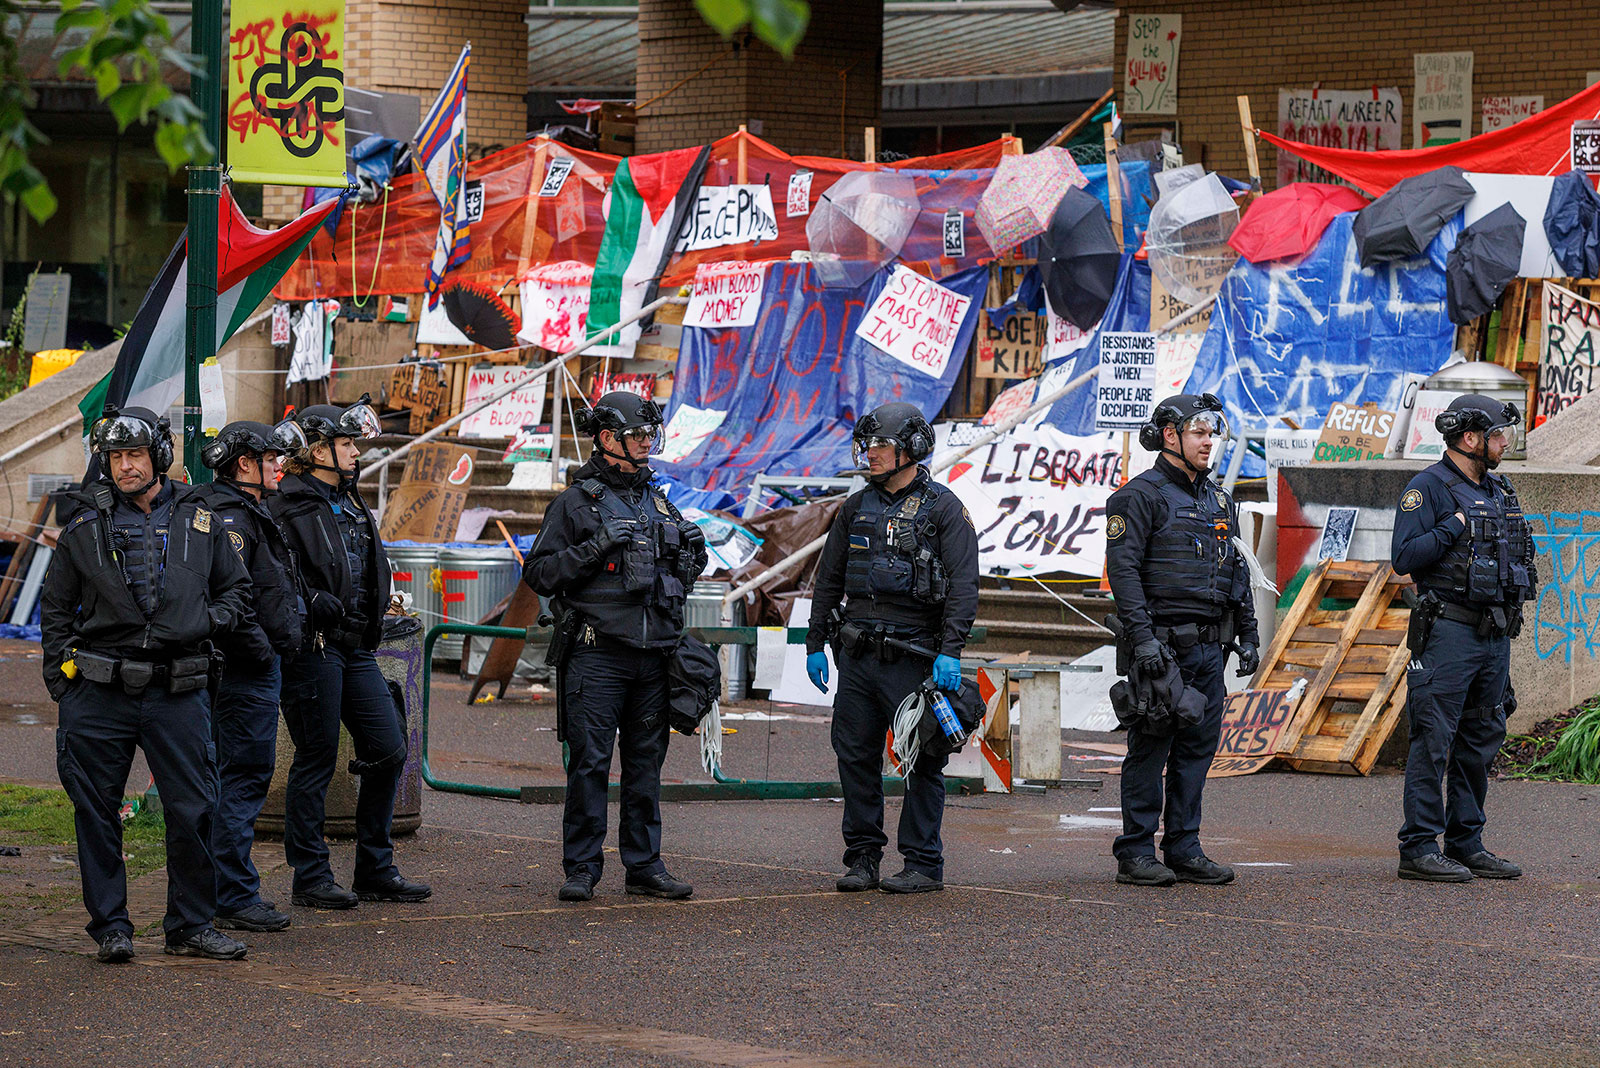 Portland police officers standby on the campus of Portland State University in Portland on Thursday.